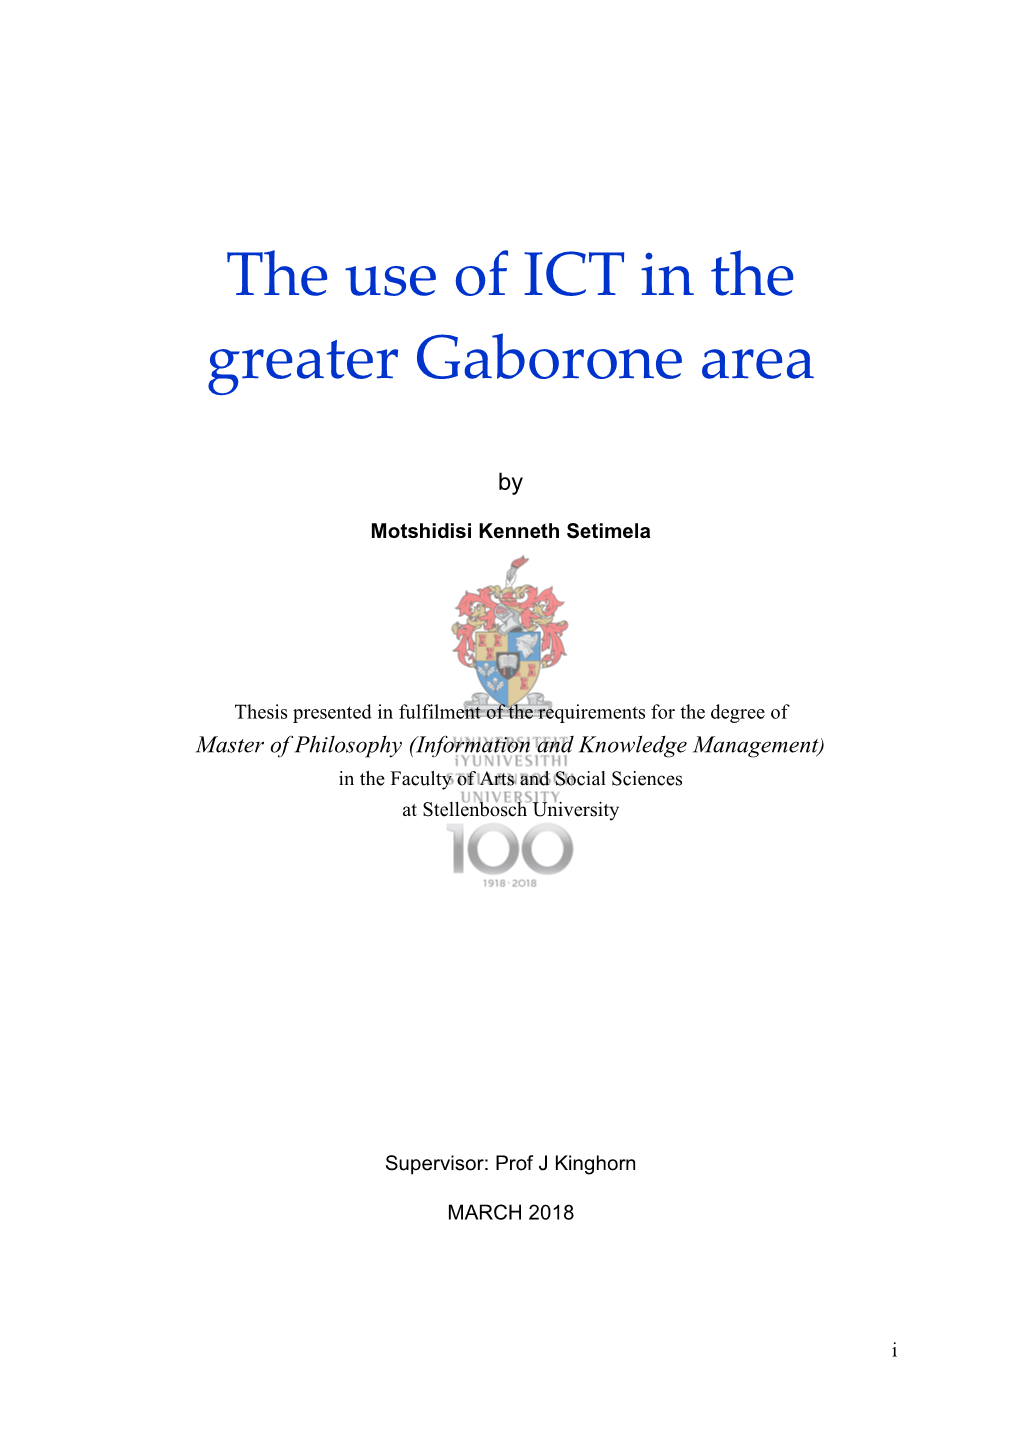 The Use of ICT in the Greater Gaborone Area